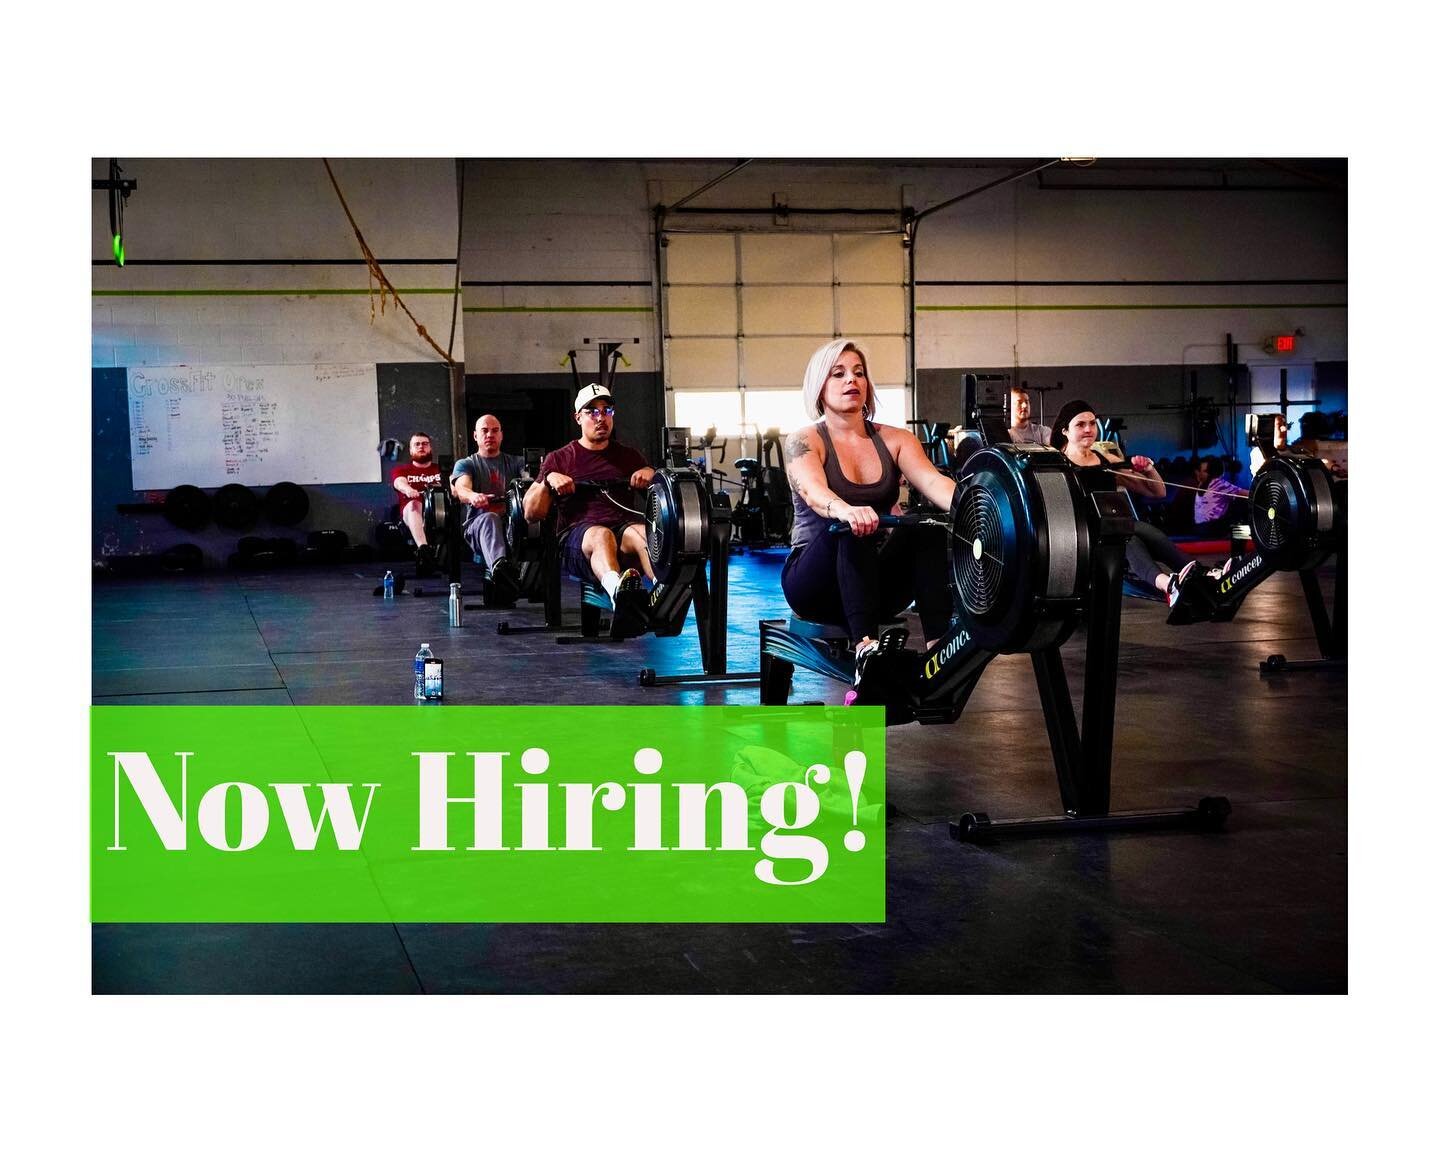 We are Hiring!

Do you enjoy helping others?
Have a passion for health &amp; wellness?
Interested in getting your CF Level 1?

We are planning for a fun year and are looking to grow our team! Message if you&rsquo;d like more info!